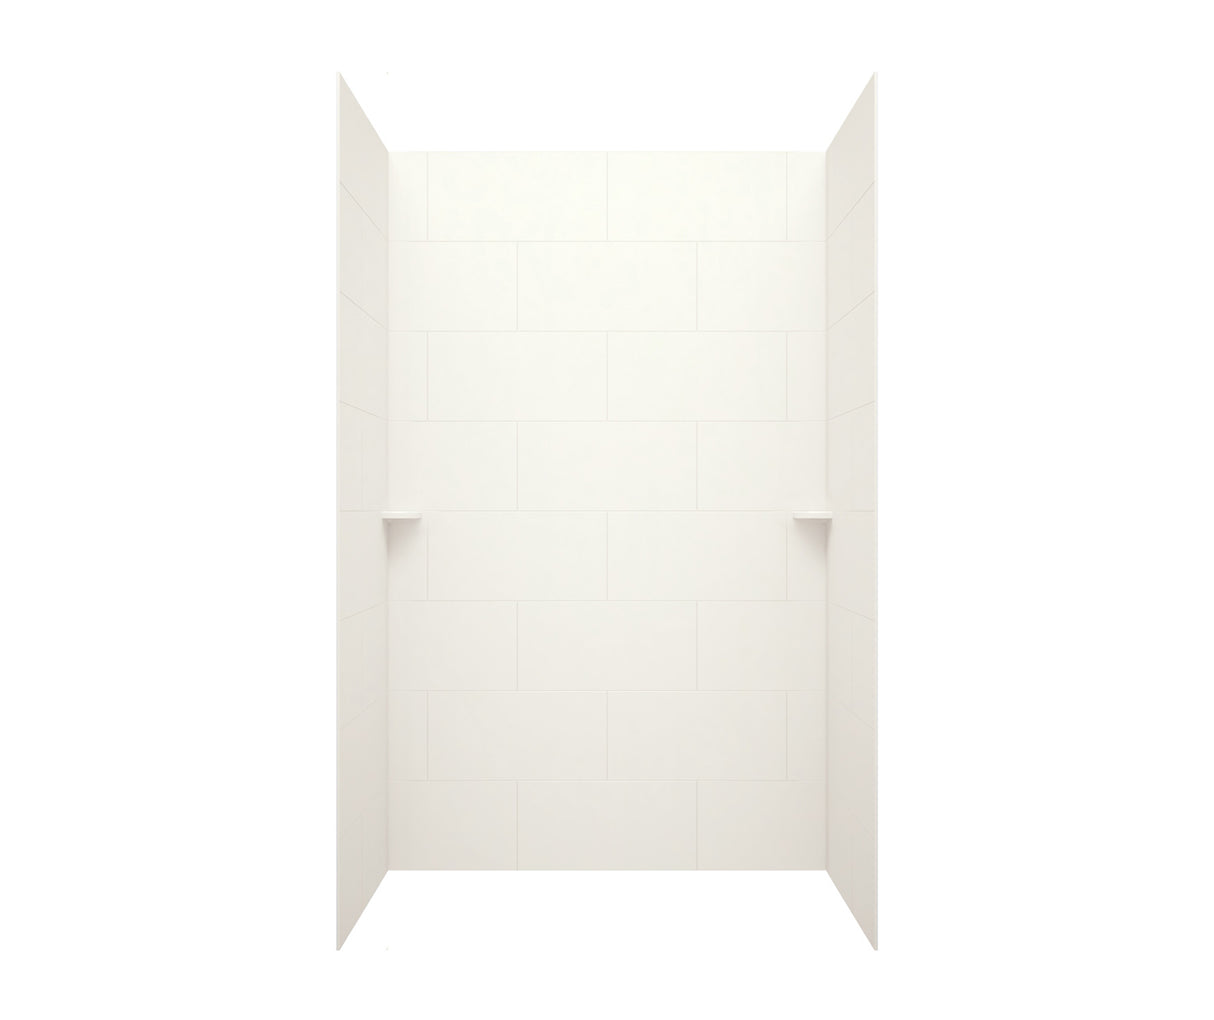 Swanstone TSMK96-3062 30 x 62 x 96 Swanstone Traditional Subway Tile Glue up Shower Wall Kit in Bisque TSMK963062.018